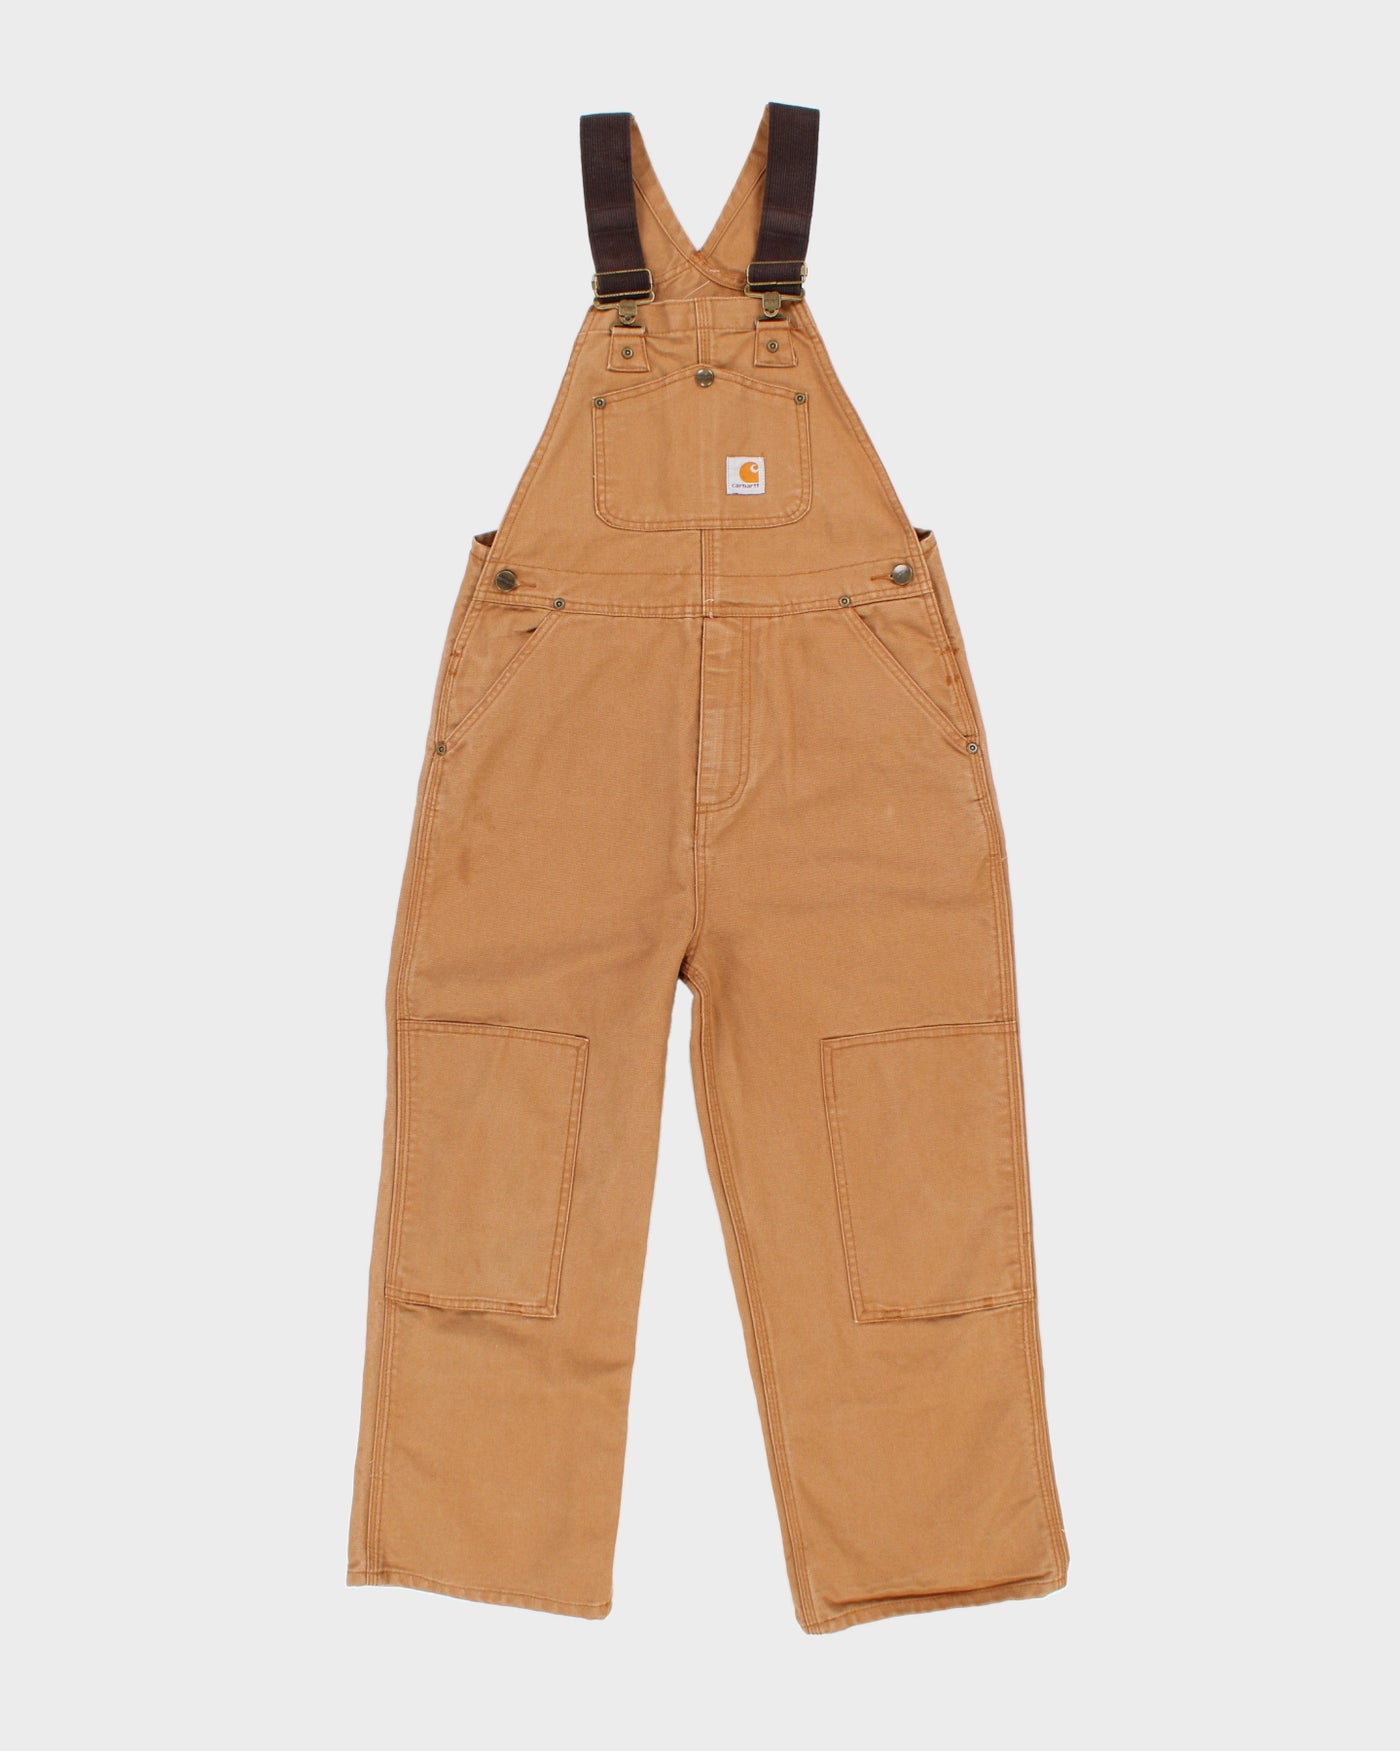 Childrens Brown Carhartt Dungarees